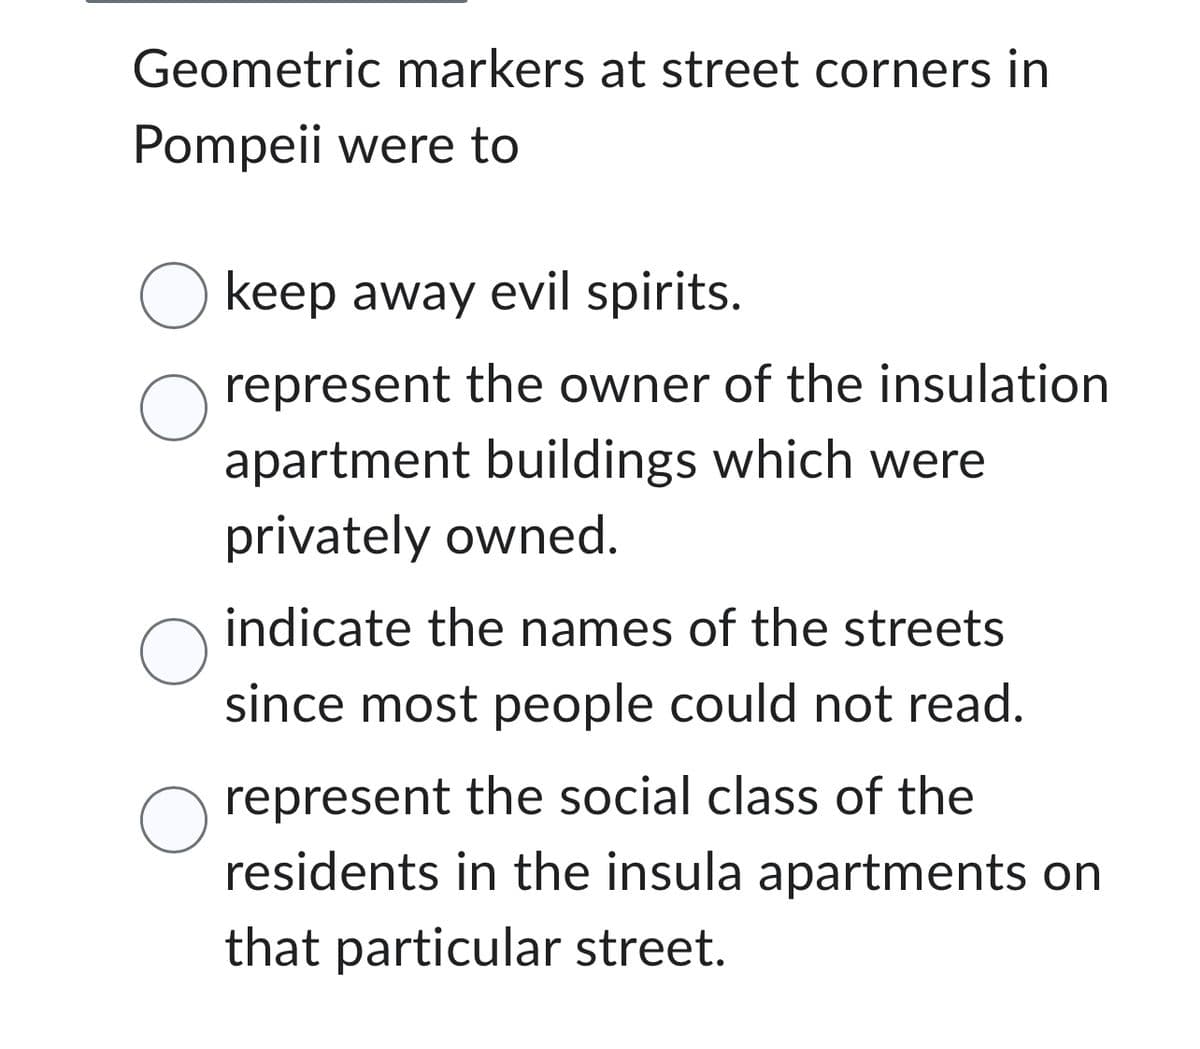 Geometric markers at street corners in
Pompeii were to
O keep away evil spirits.
O represent the owner of the insulation
apartment buildings which were
privately owned.
O
O
indicate the names of the streets
since most people could not read.
represent the social class of the
residents in the insula apartments on
that particular street.